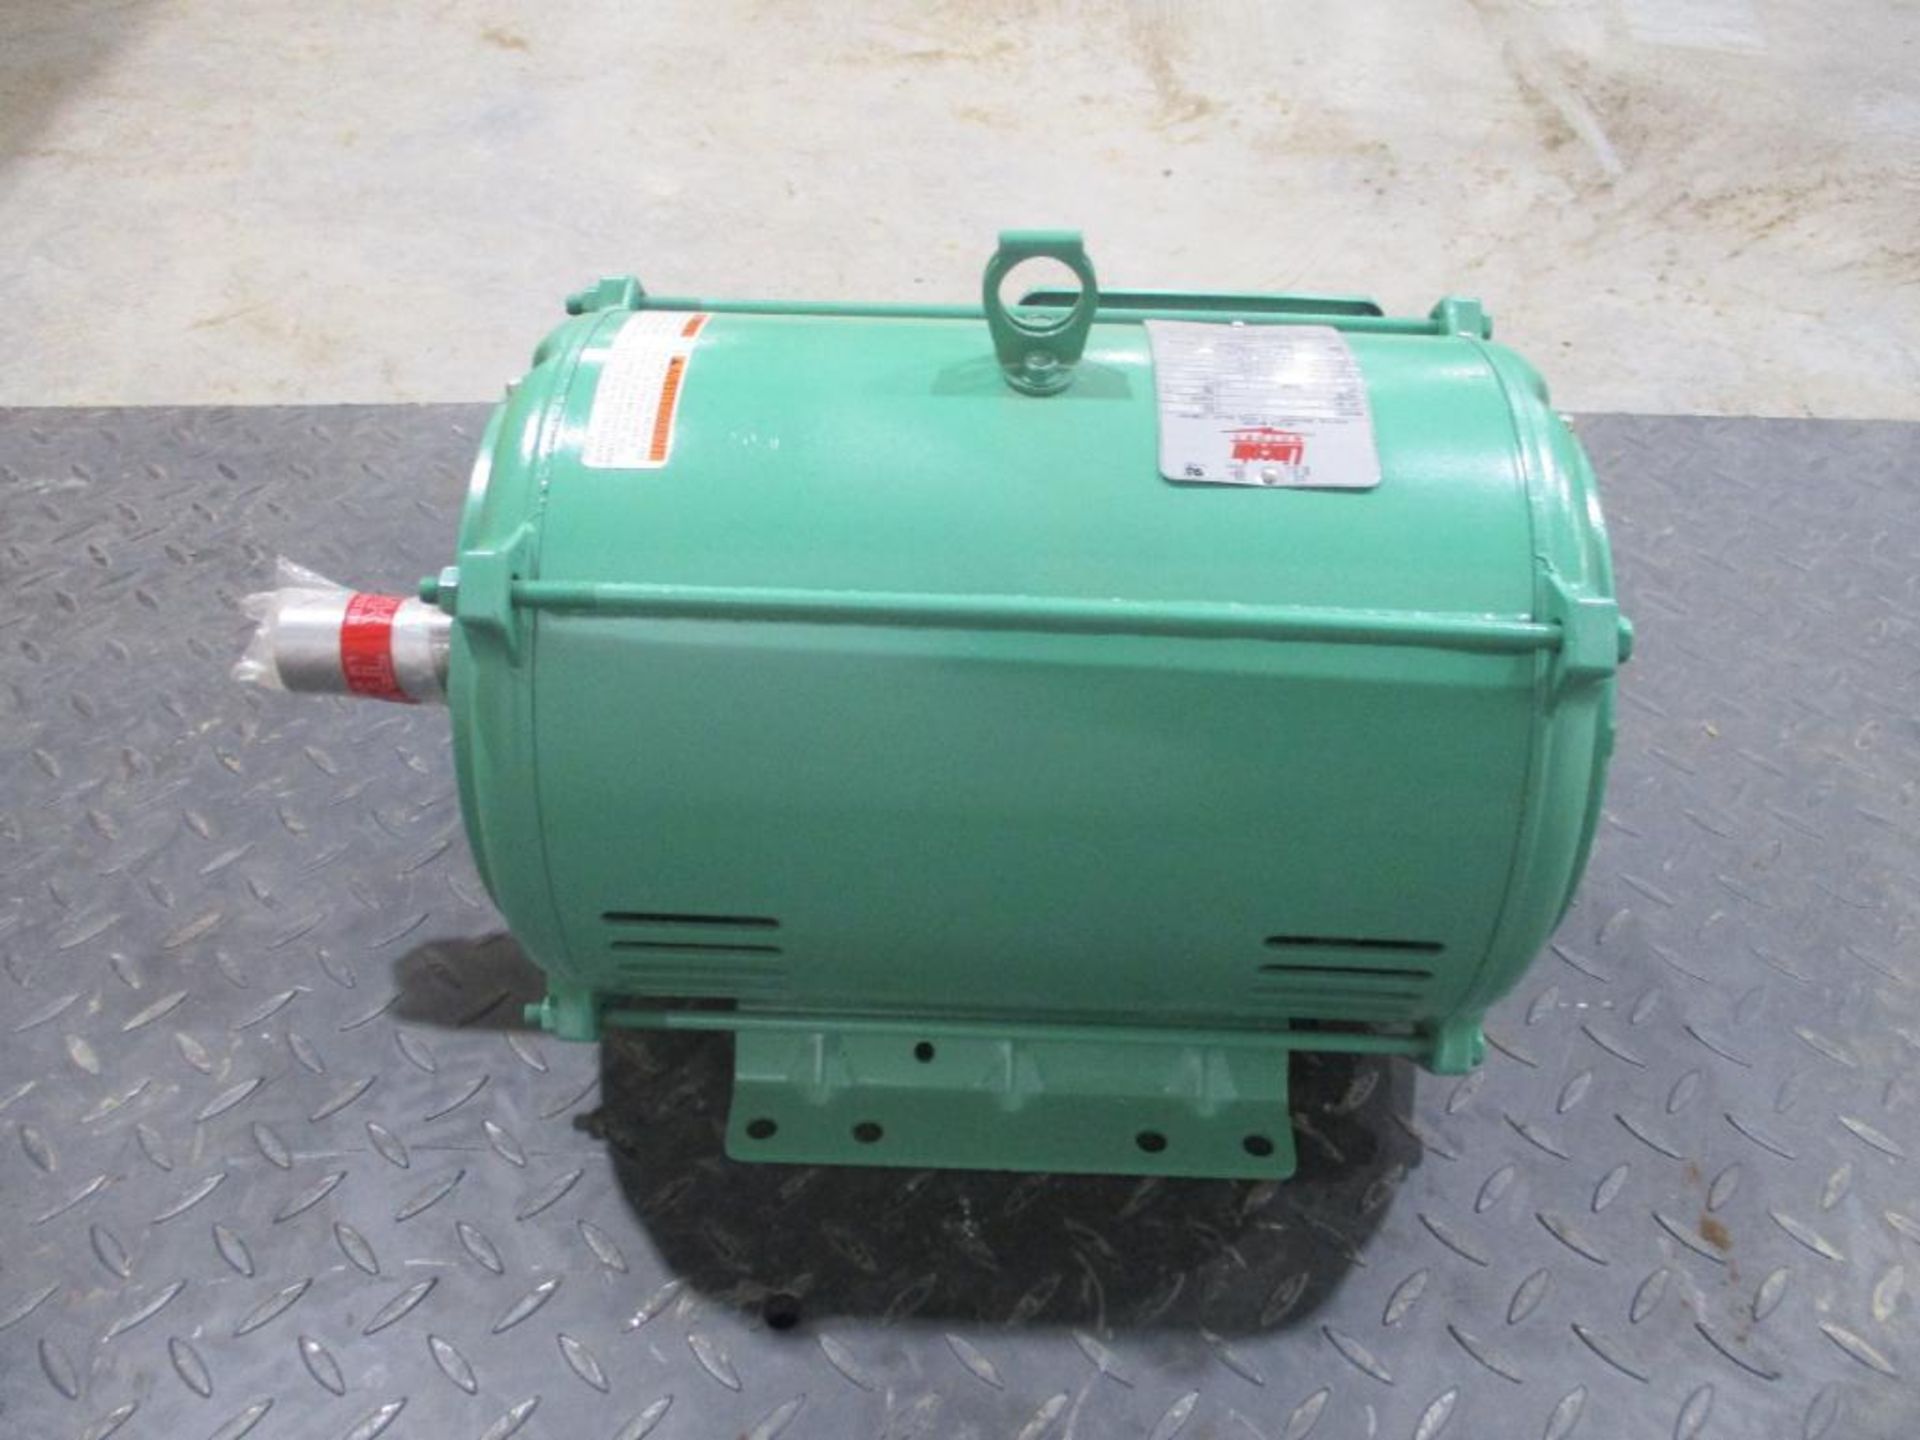 LINCLON MOTORS 3 PHASE 7 1/2HP 1515/2910RPM 213T FRAME A/C MOTOR P/N LM32740A, 103# lbs (There will - Image 4 of 5